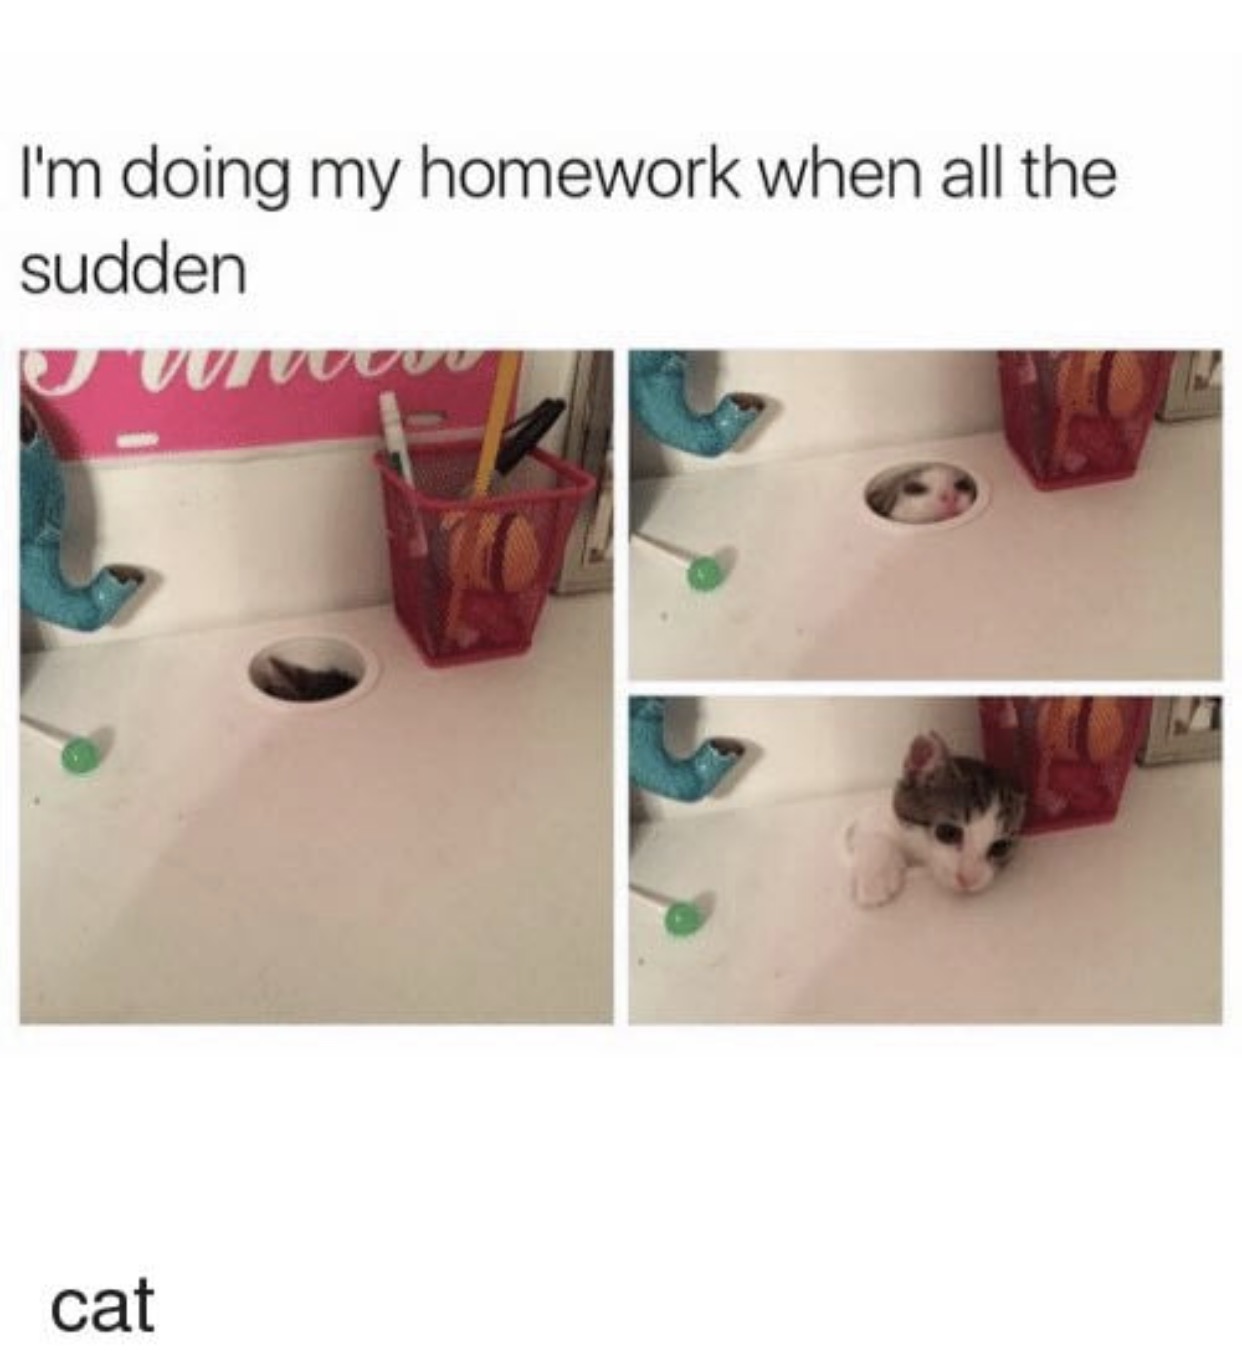 home work meme of cat climbing through computer cable hole